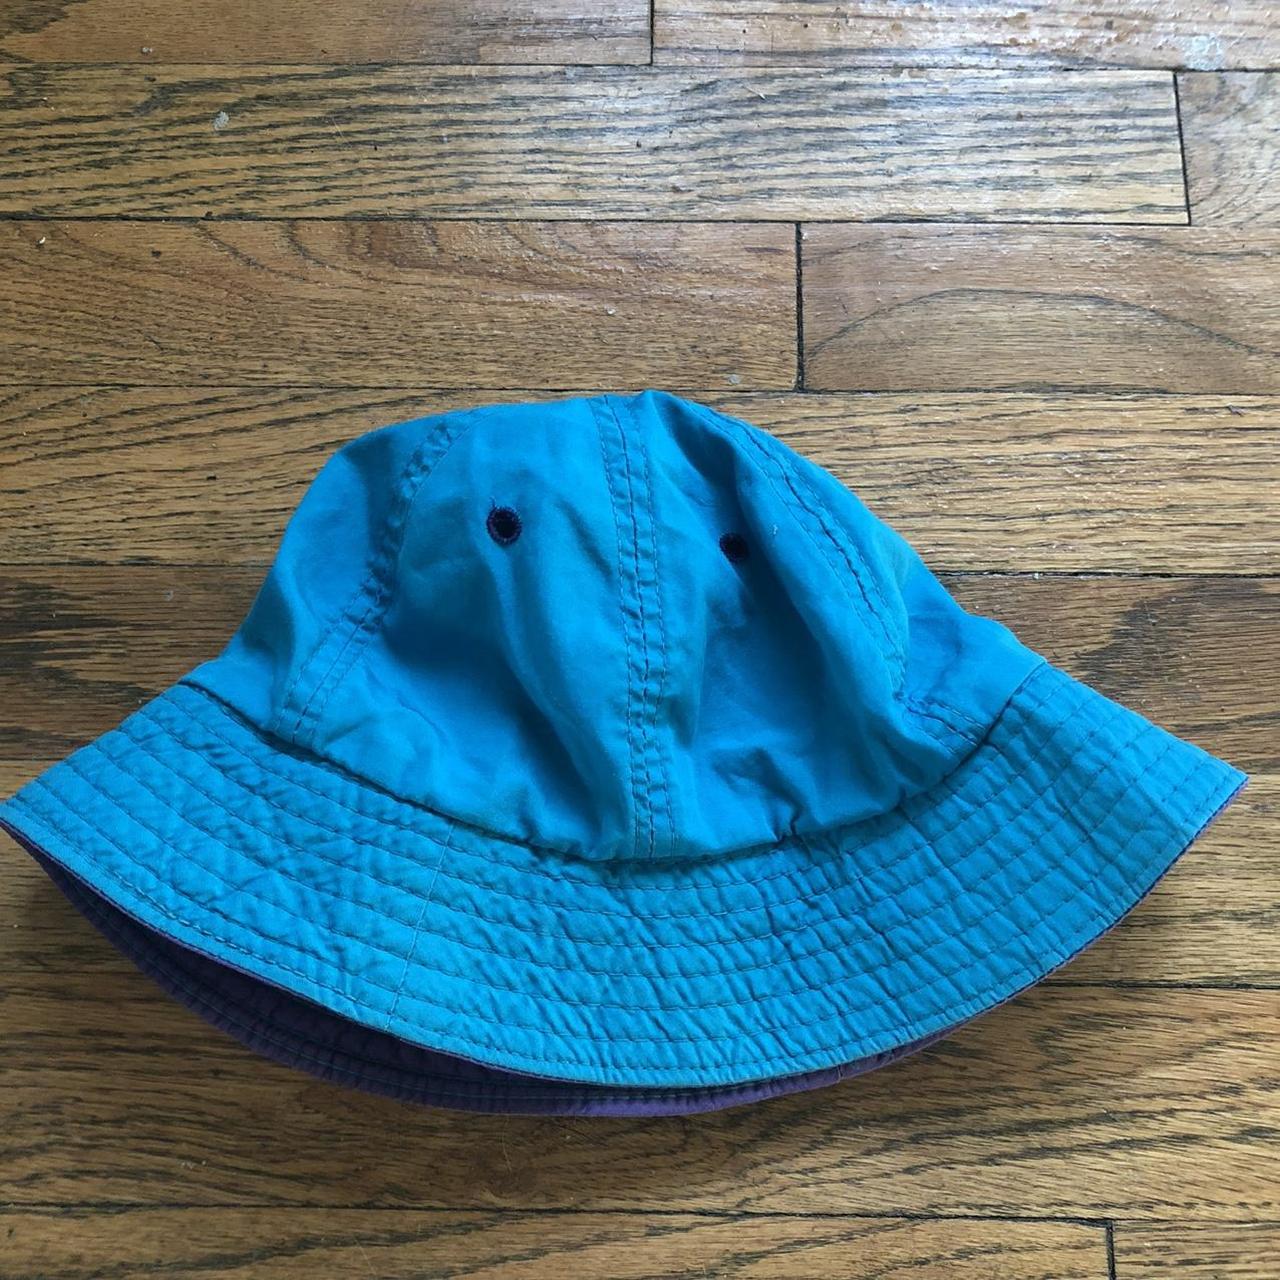 SA Fishing Boonie Bucket Hat by The Game. One size. - Depop